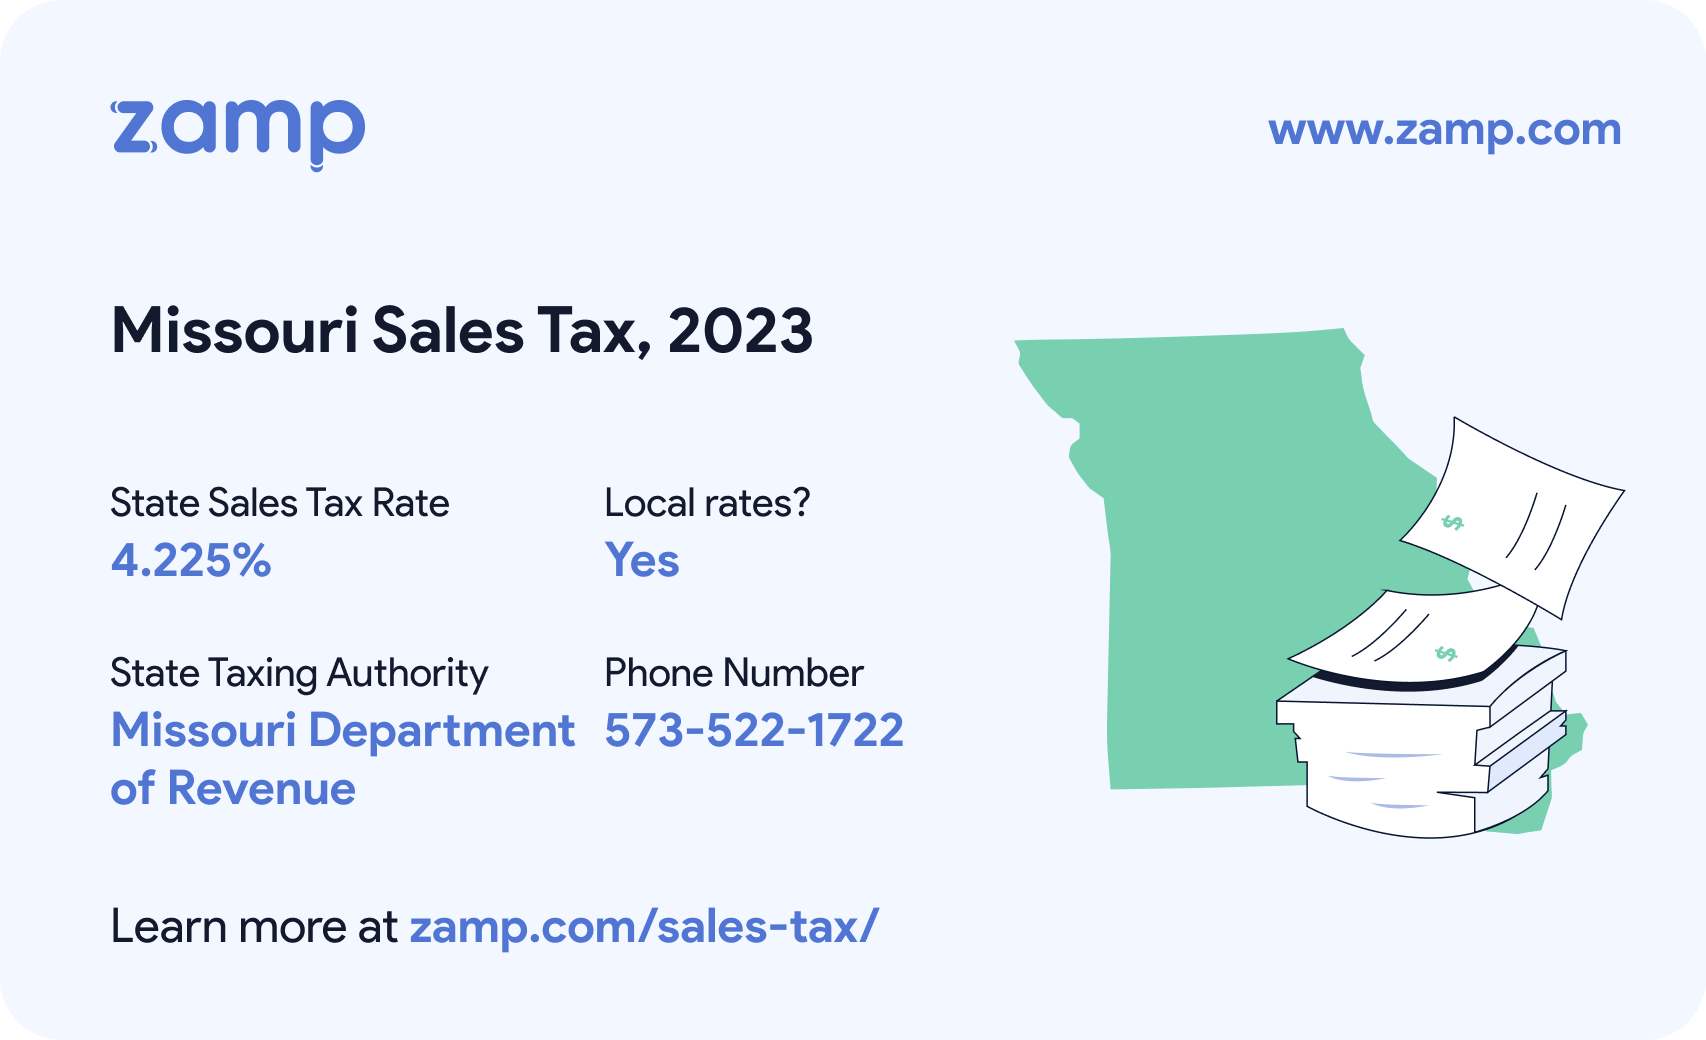 Missouri basic sales tax info for 2023 - State sales tax rate: 4.225%, Local rates? Yes; State Taxing Authority: Missouri Department of Revenue; and phone number 573-522-1722